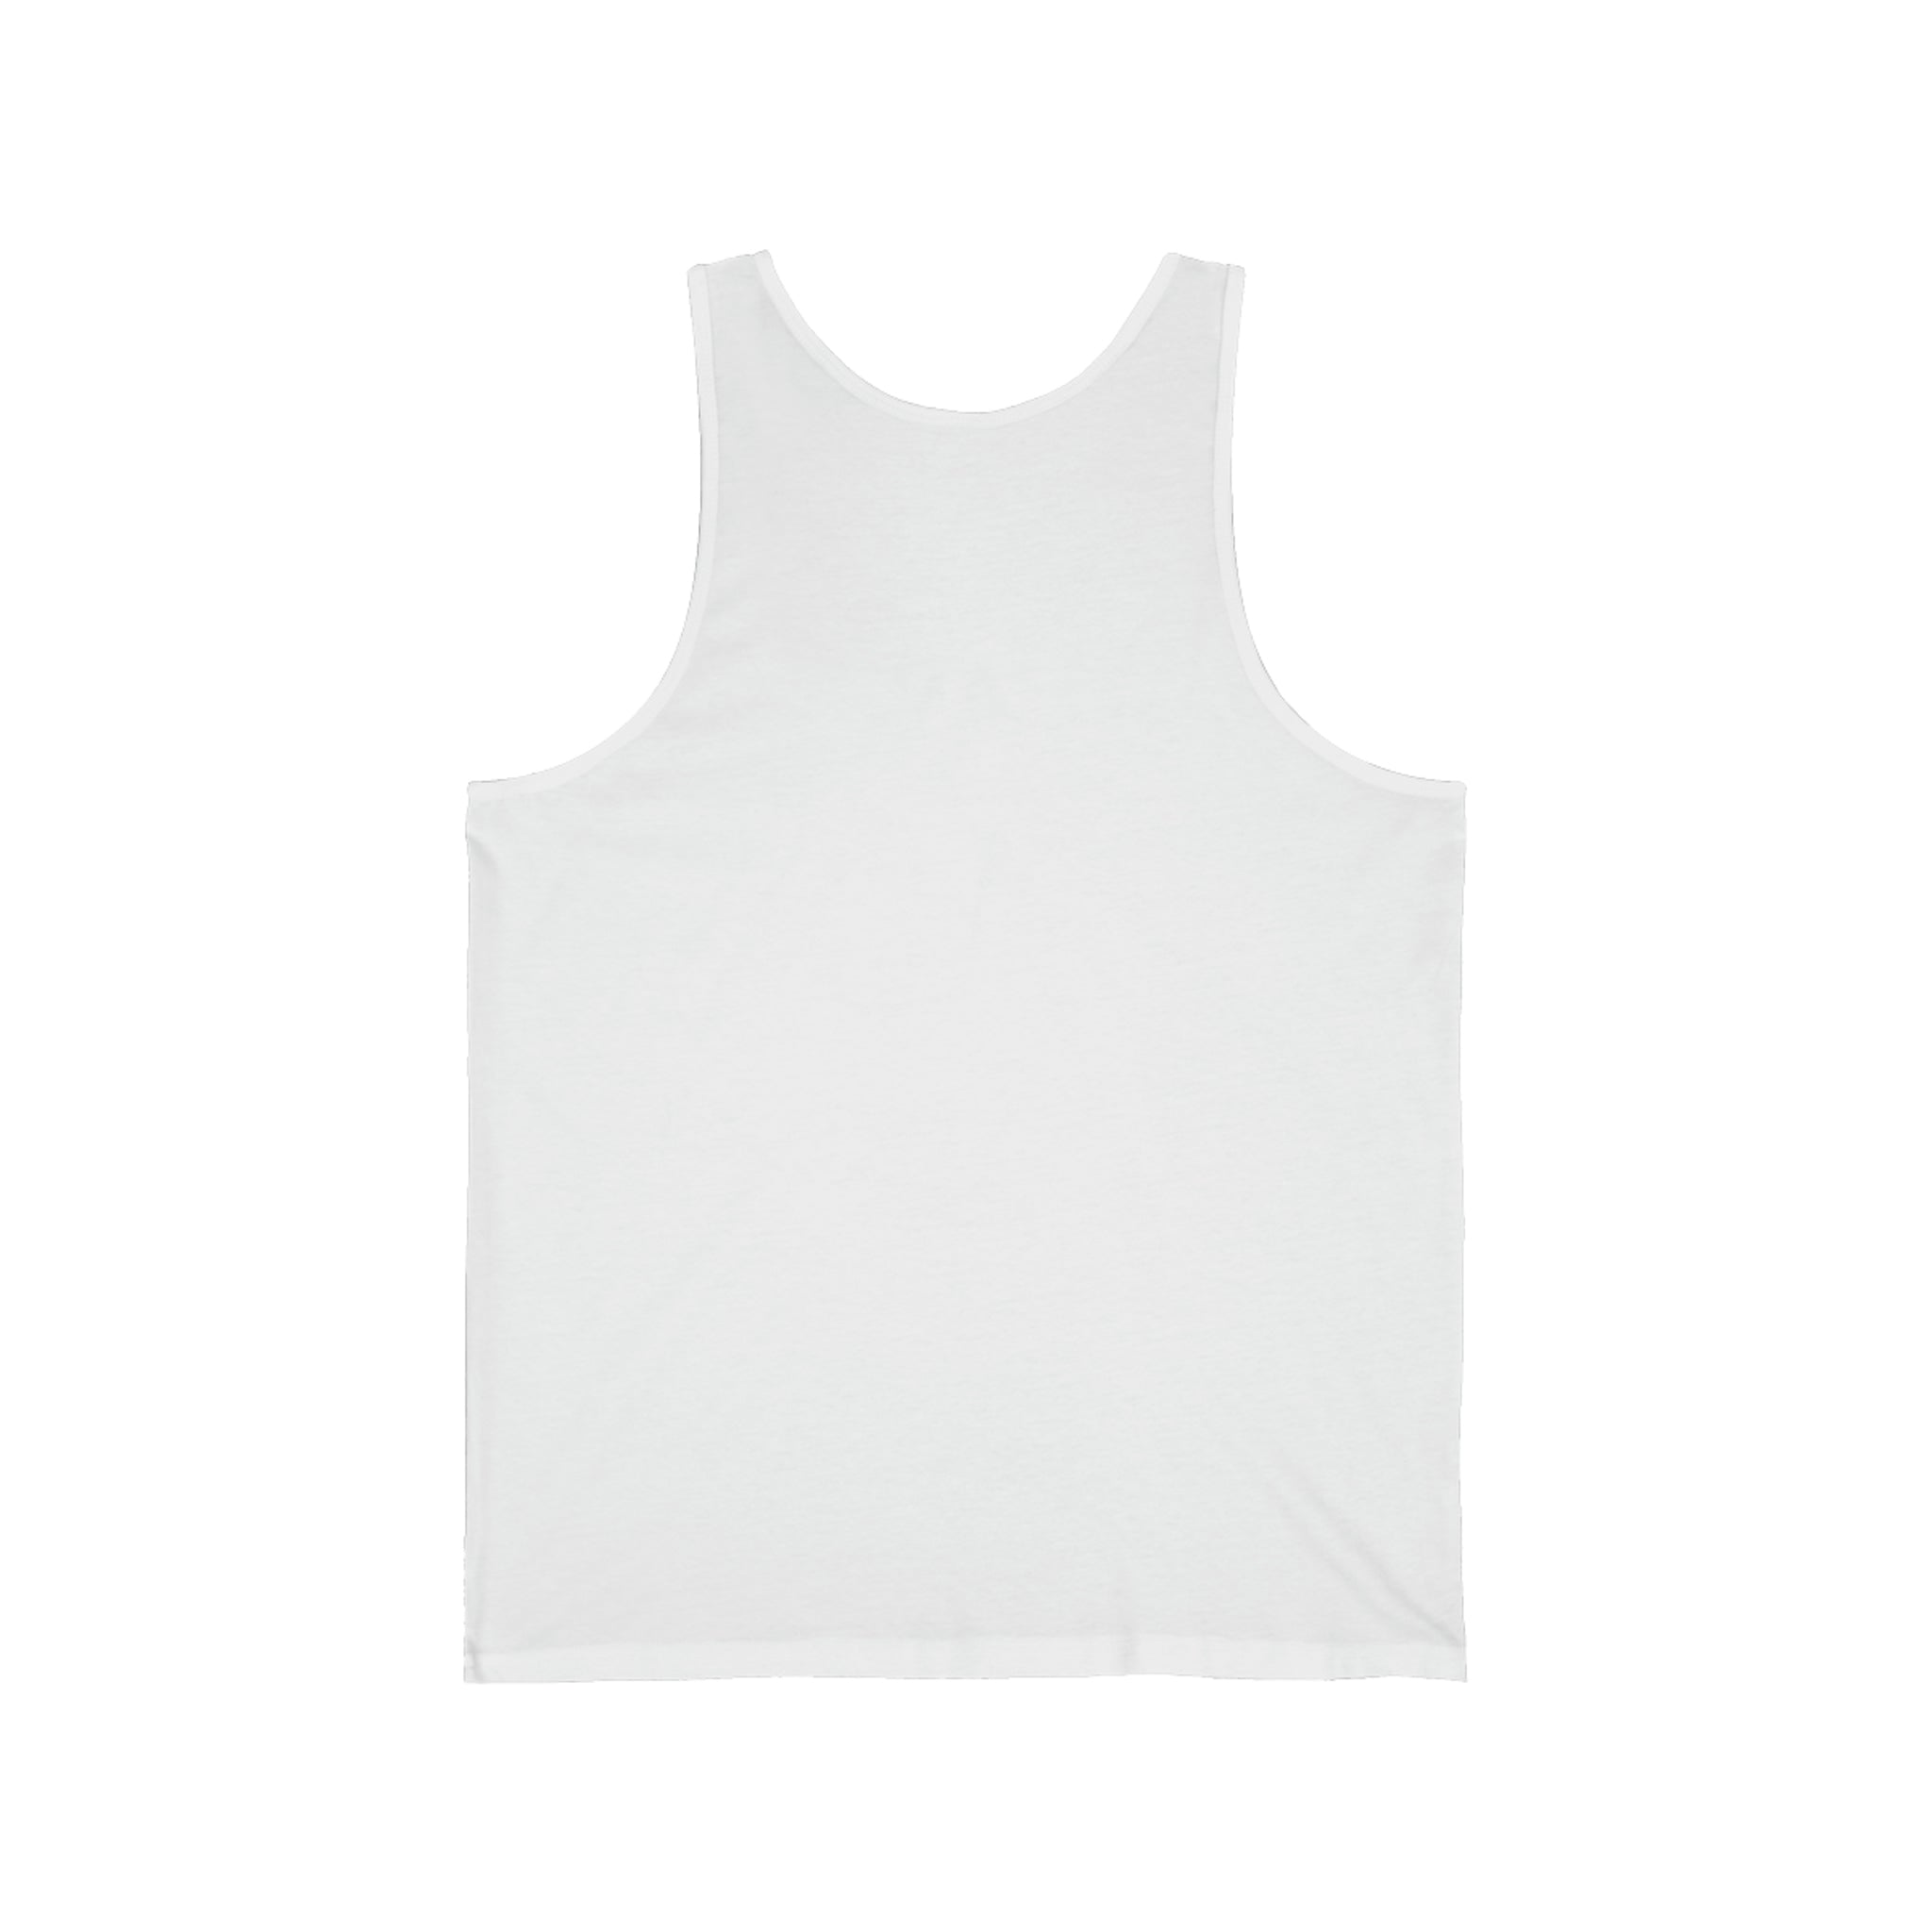 "Summersong: A Celebration of Sun, Sweat, and Joy"- Tank Top